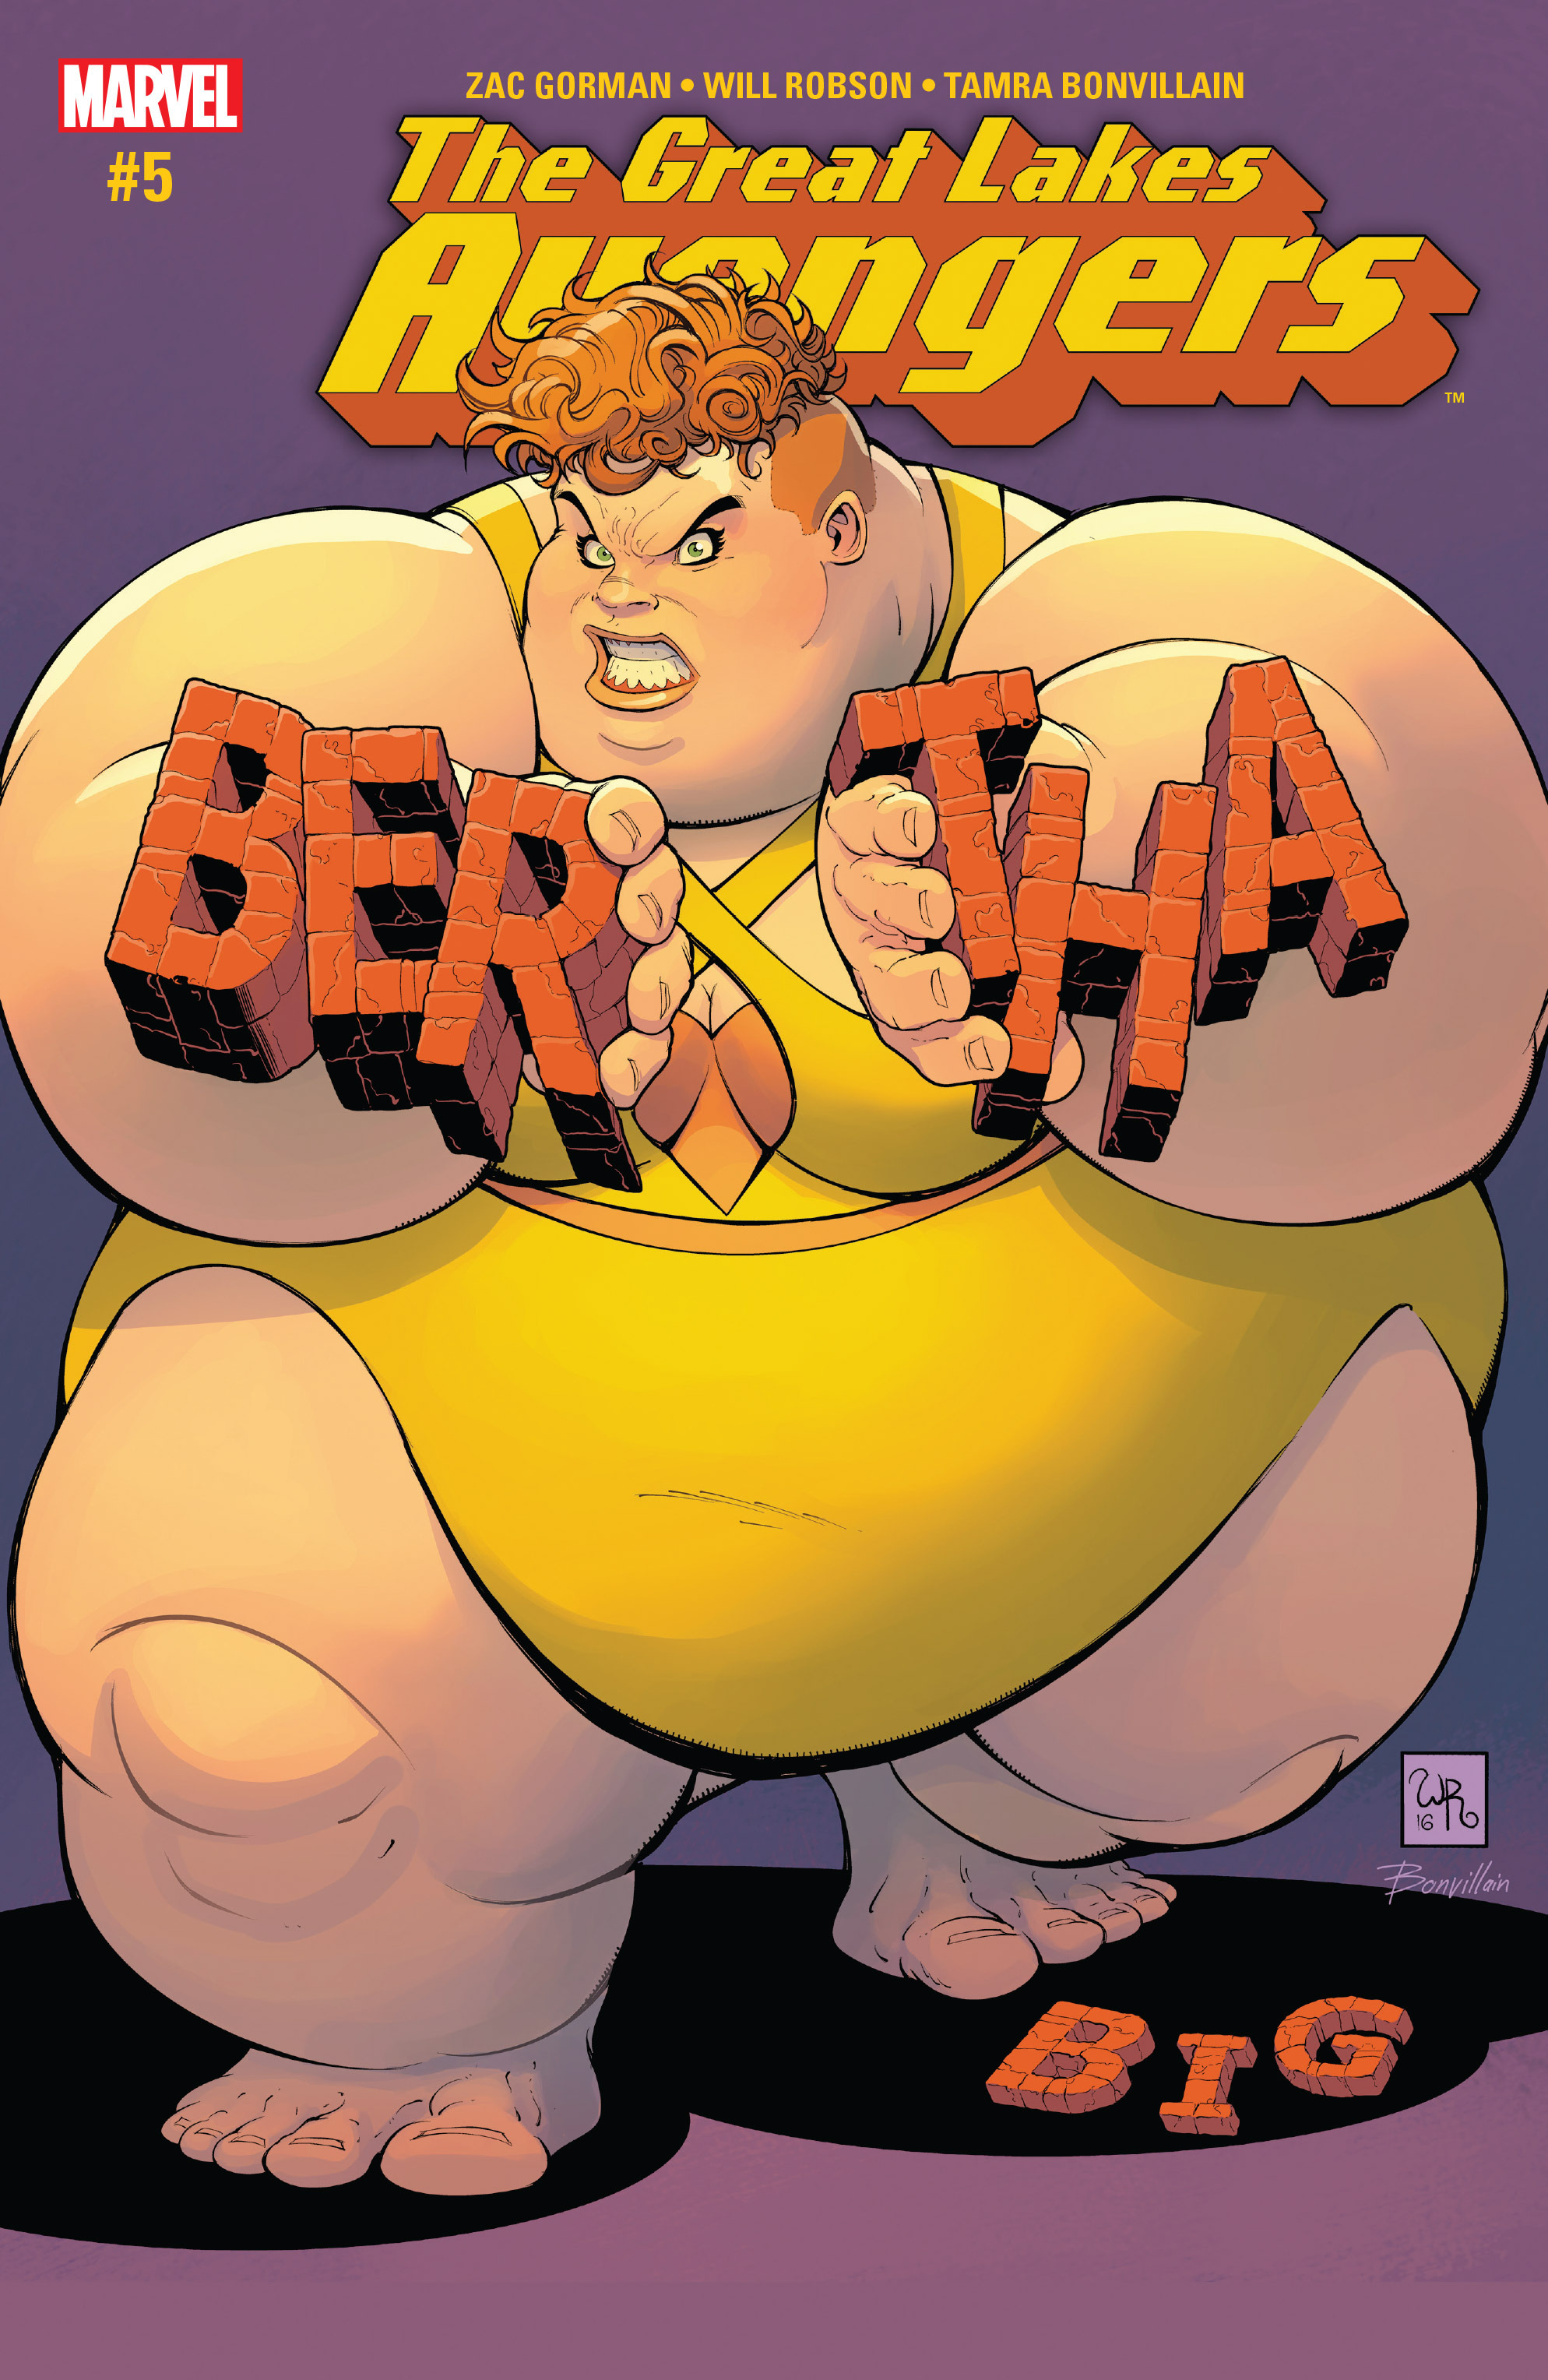 The Great Lakes Avengers 5 Page 1